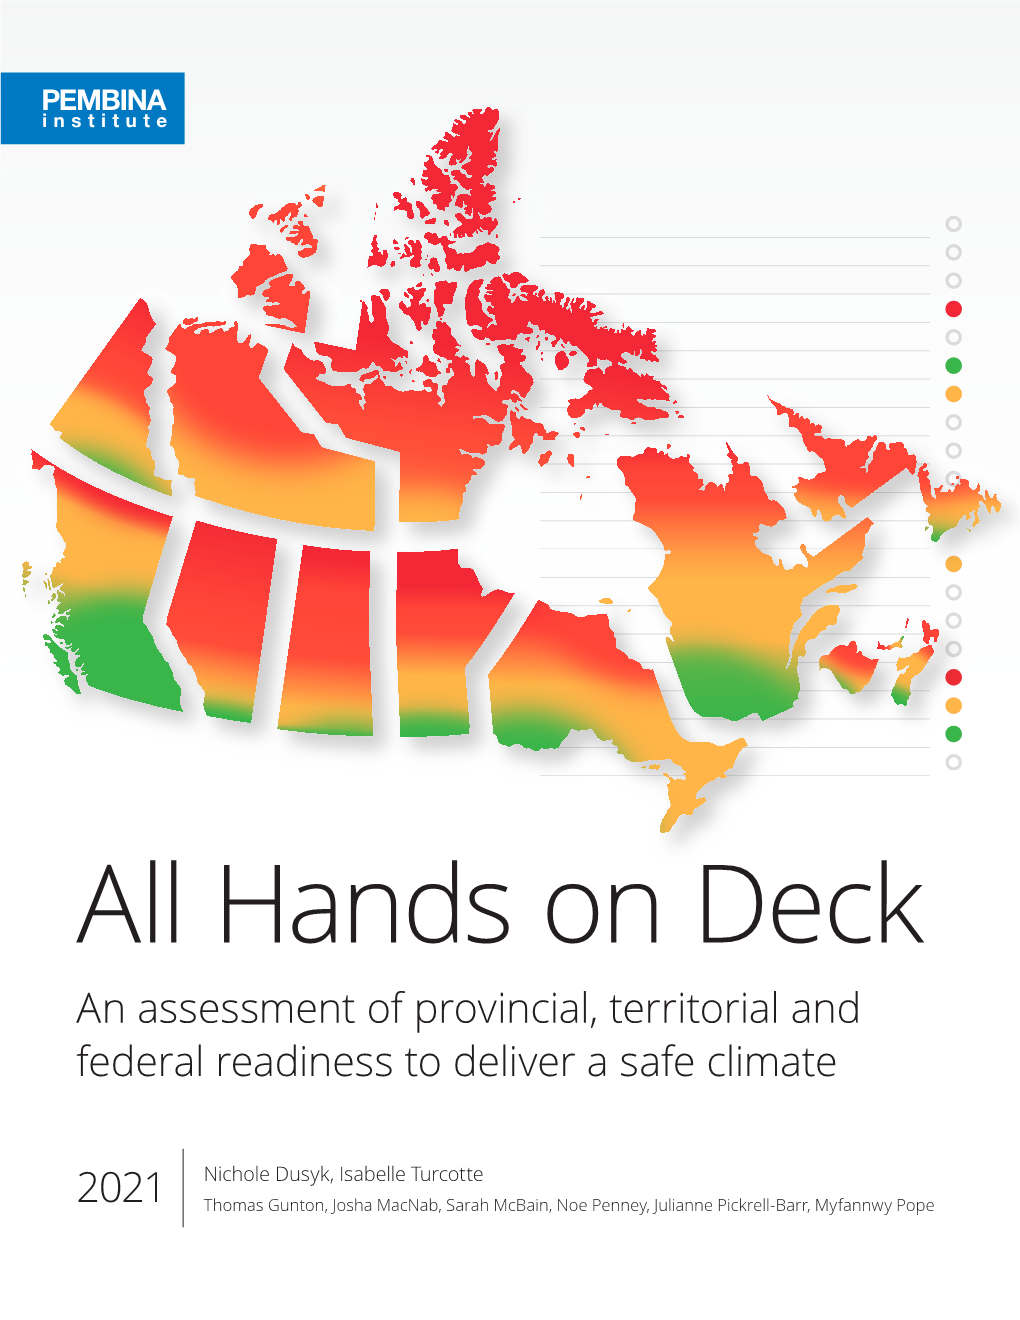 All Hands on Deck an Assessment of Provincial, Territorial and Federal Readiness to Deliver a Safe Climate